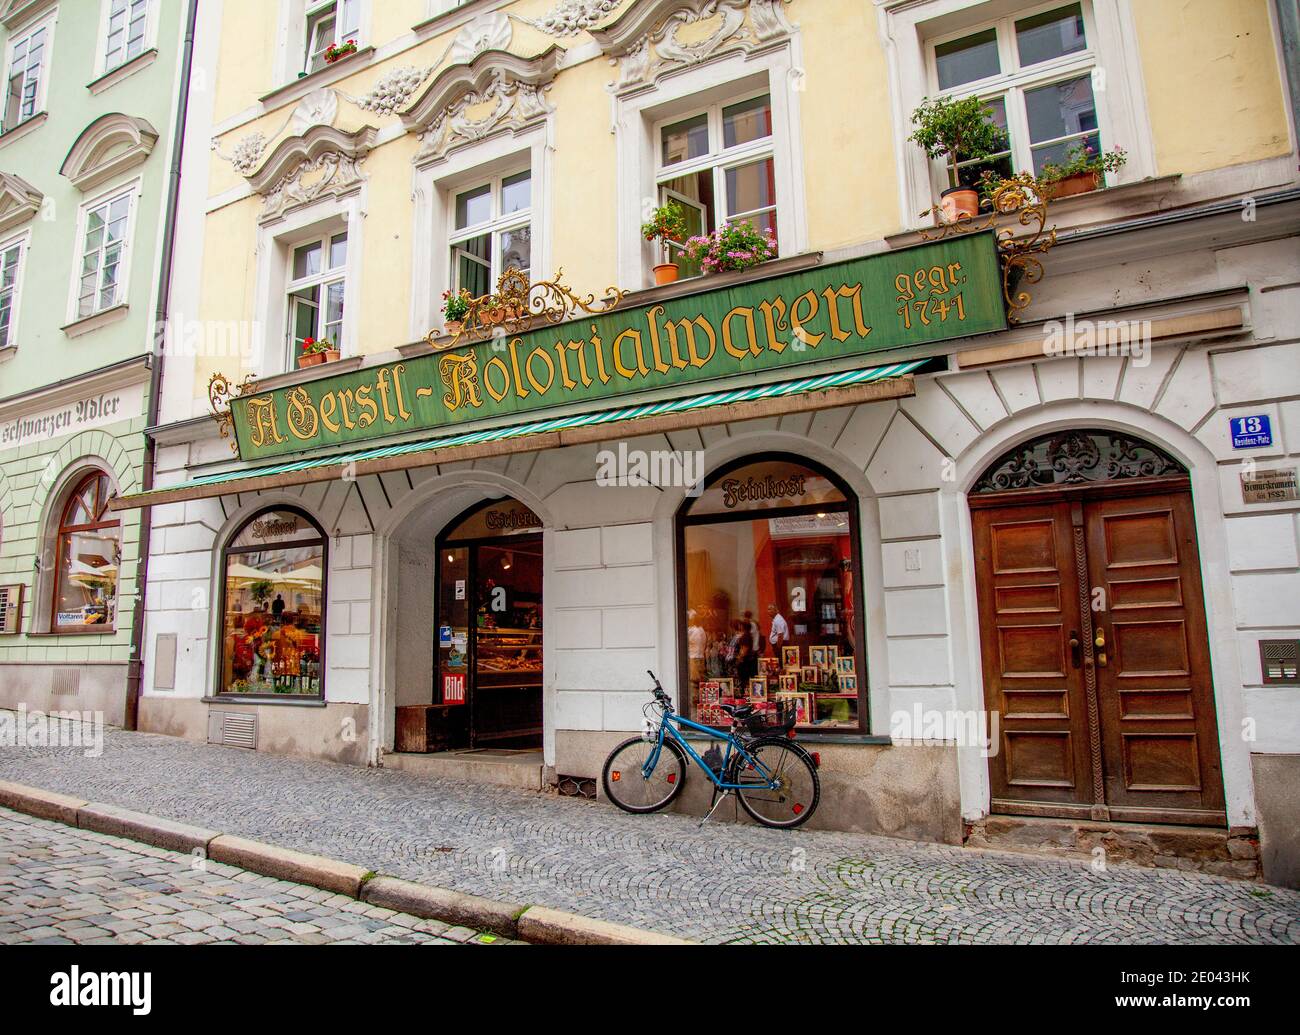 Old fashioned sign sets off the baroque architecture of Gerstl Kolonialwaren, a grocery store at Residenzplatz 13,  Passau, Bavaria, Germany. Stock Photo